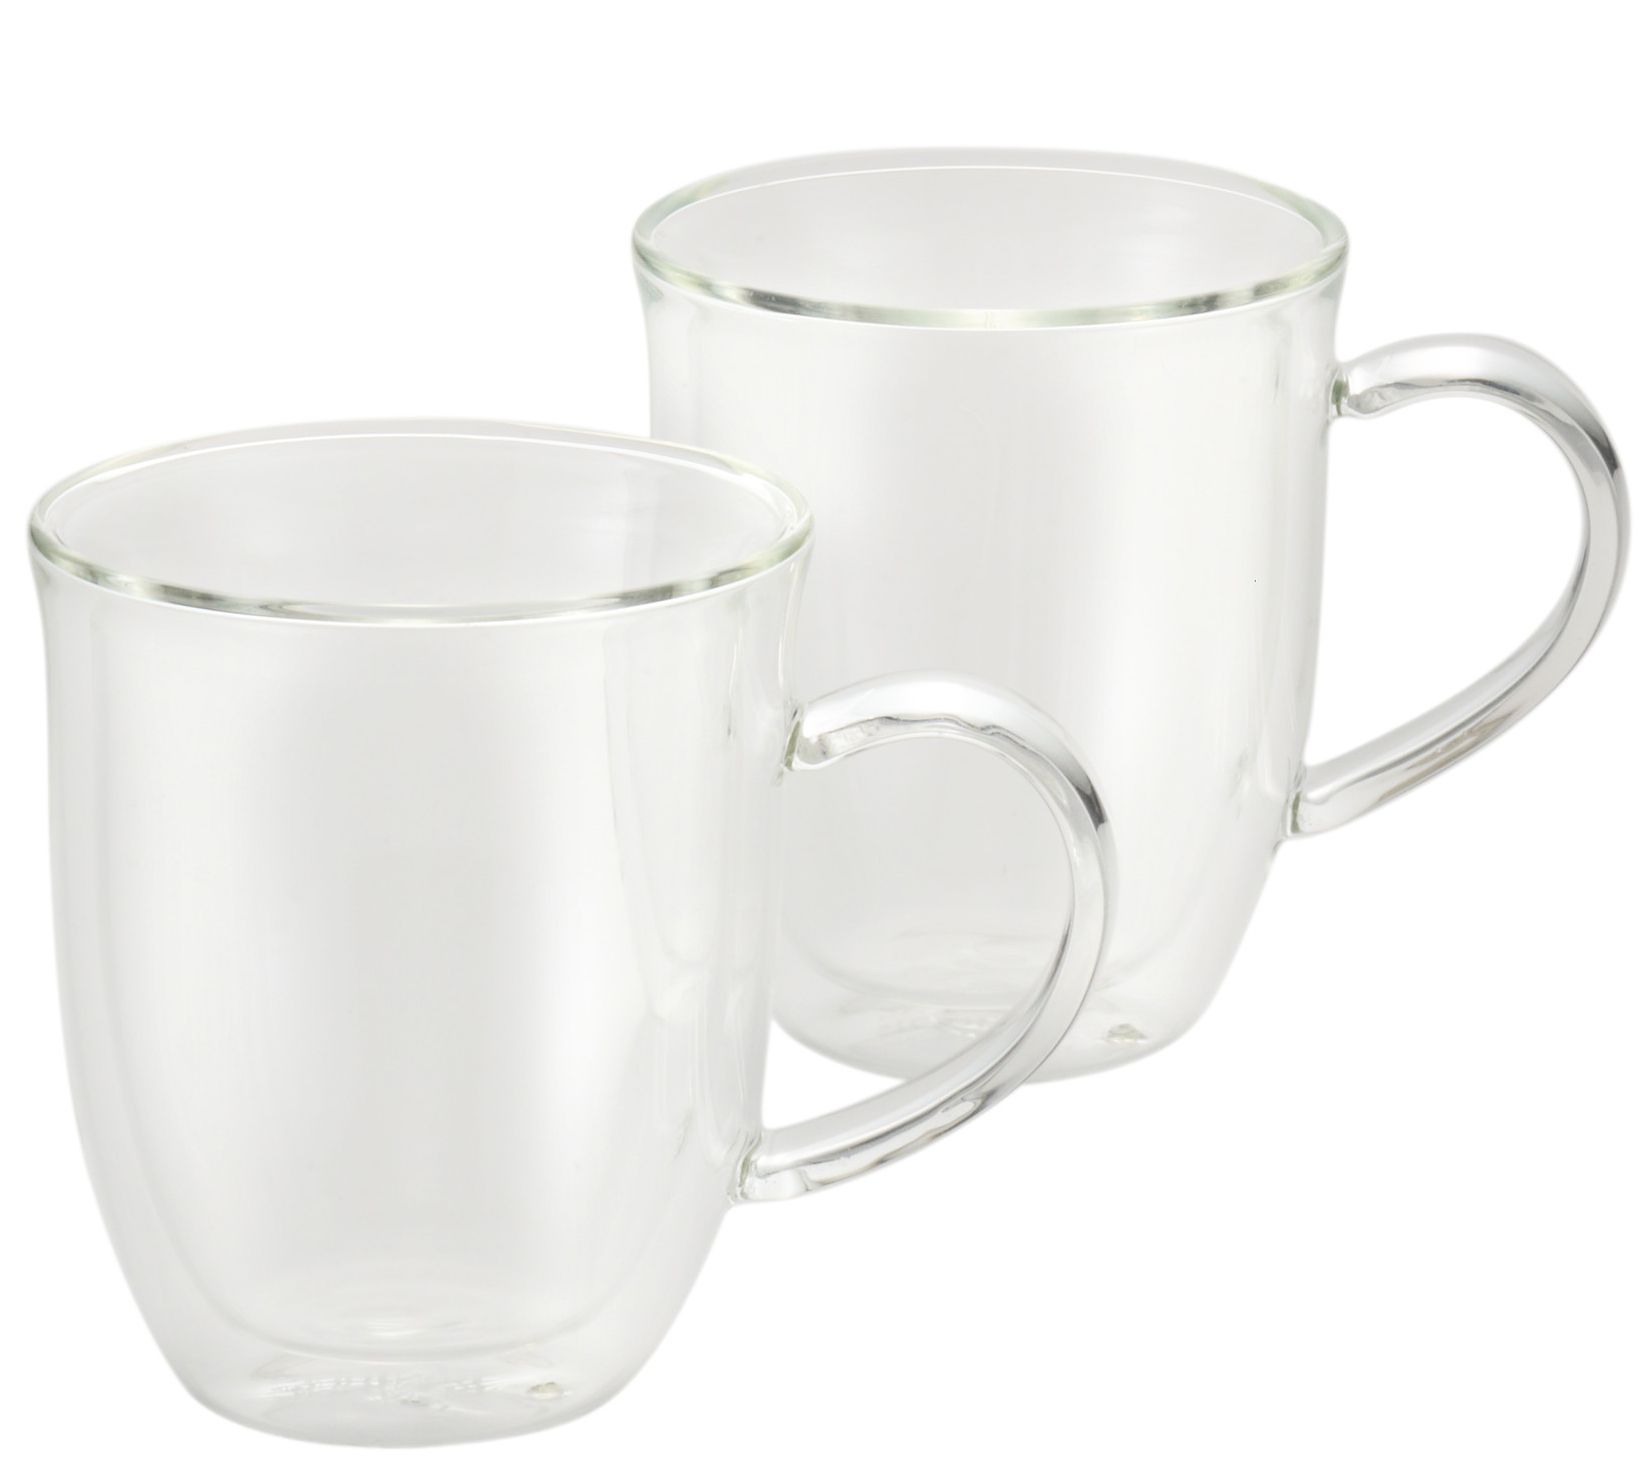 BonJour Coffee 12-oz Insulated Glass Latte Cups, Set of 2 